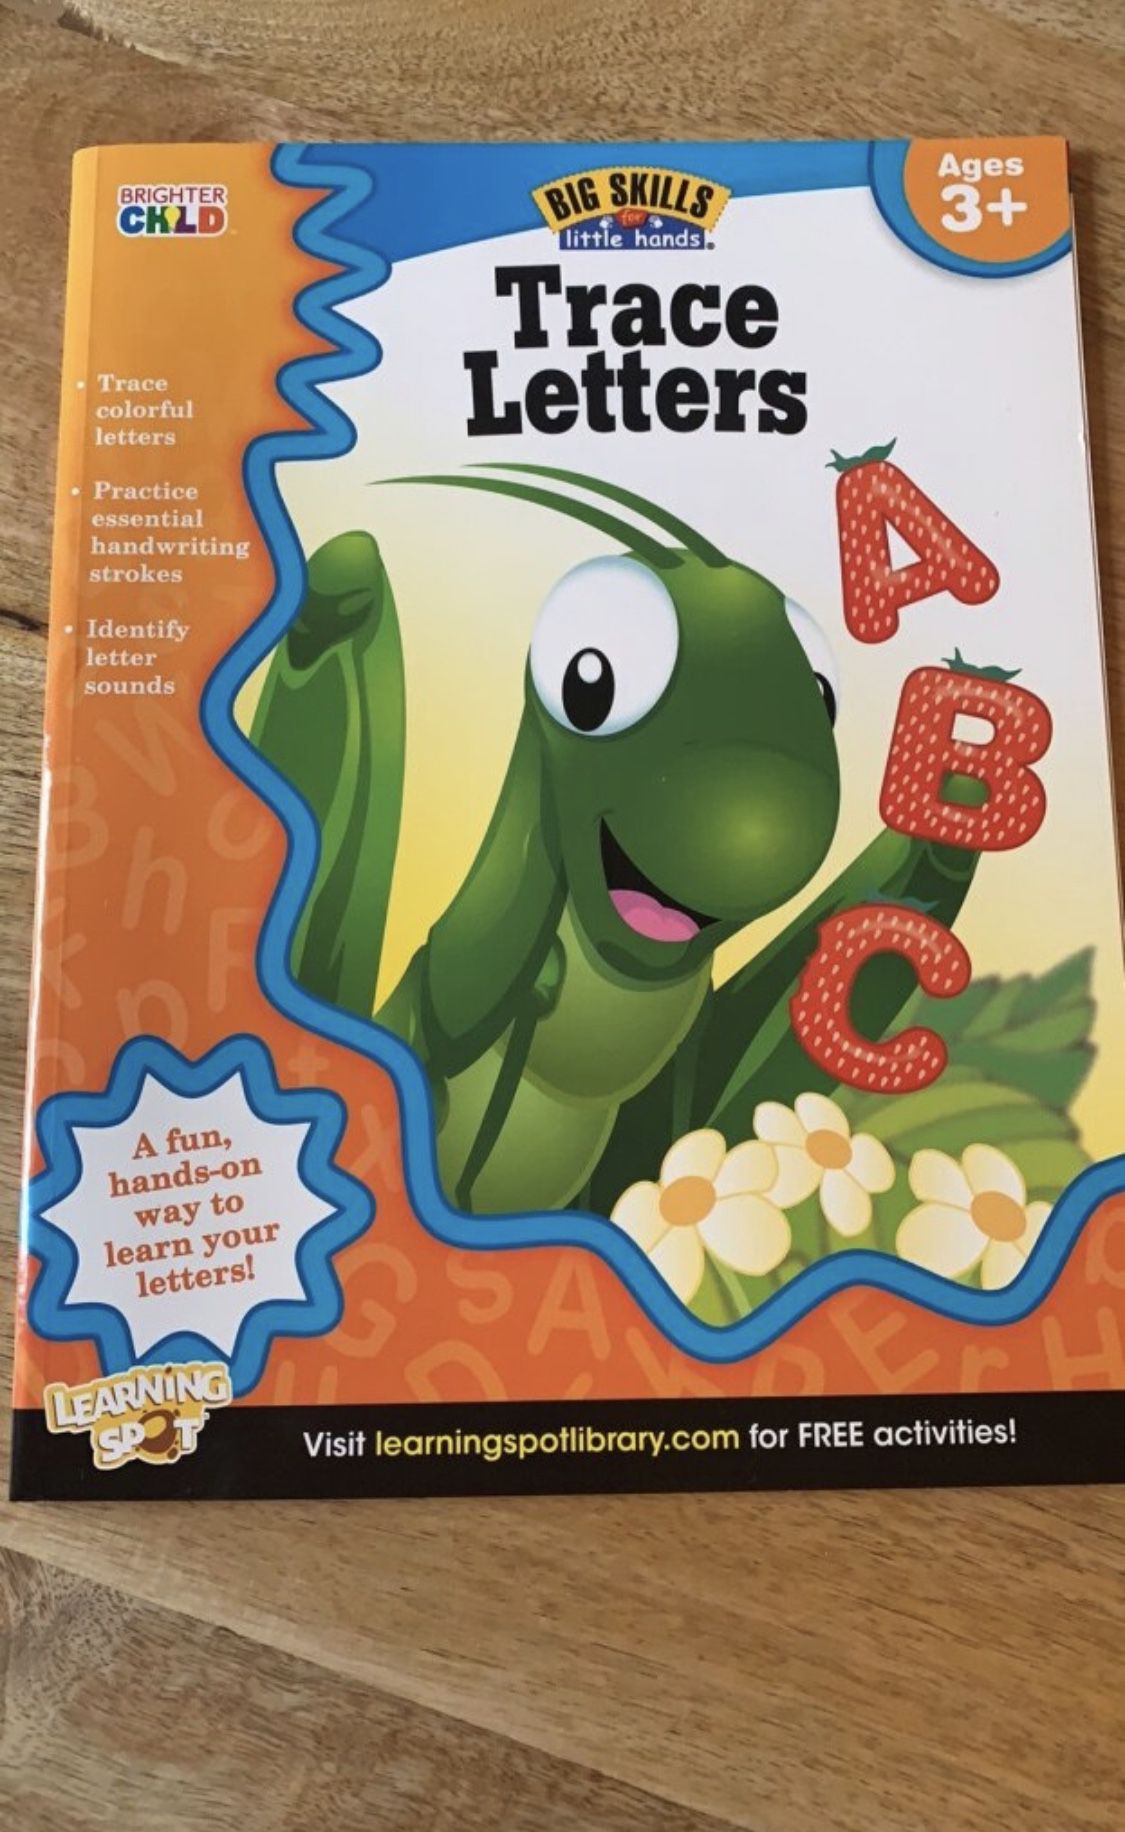 Brighter Child Trace Letters Workbook